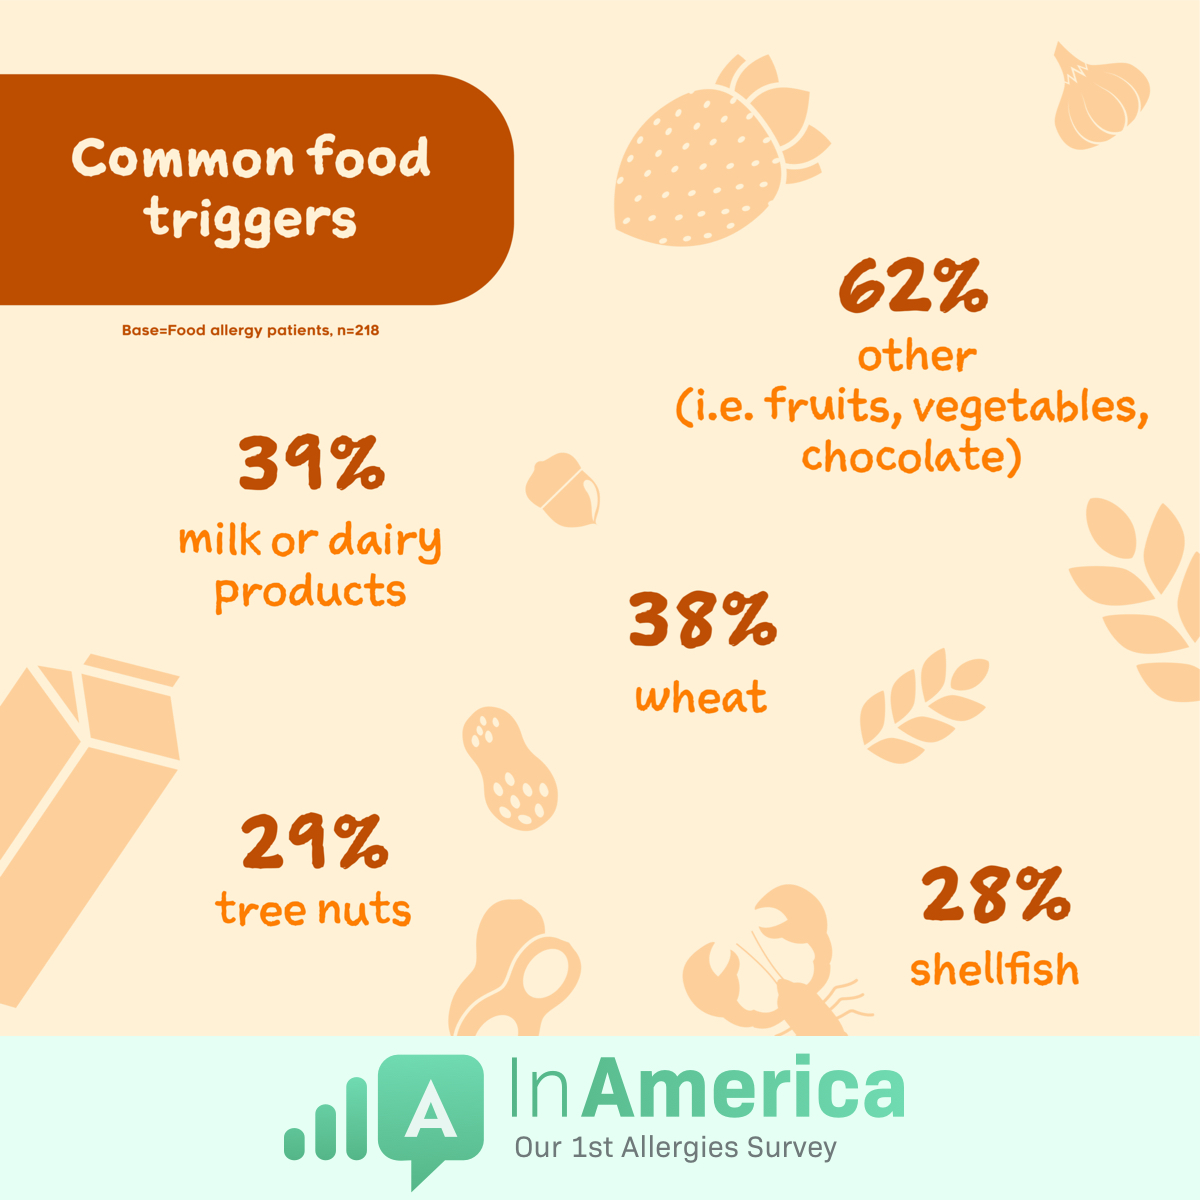 The most common food allergy triggers are wheat, milk or dairy products, tree nuts, and shellfish.